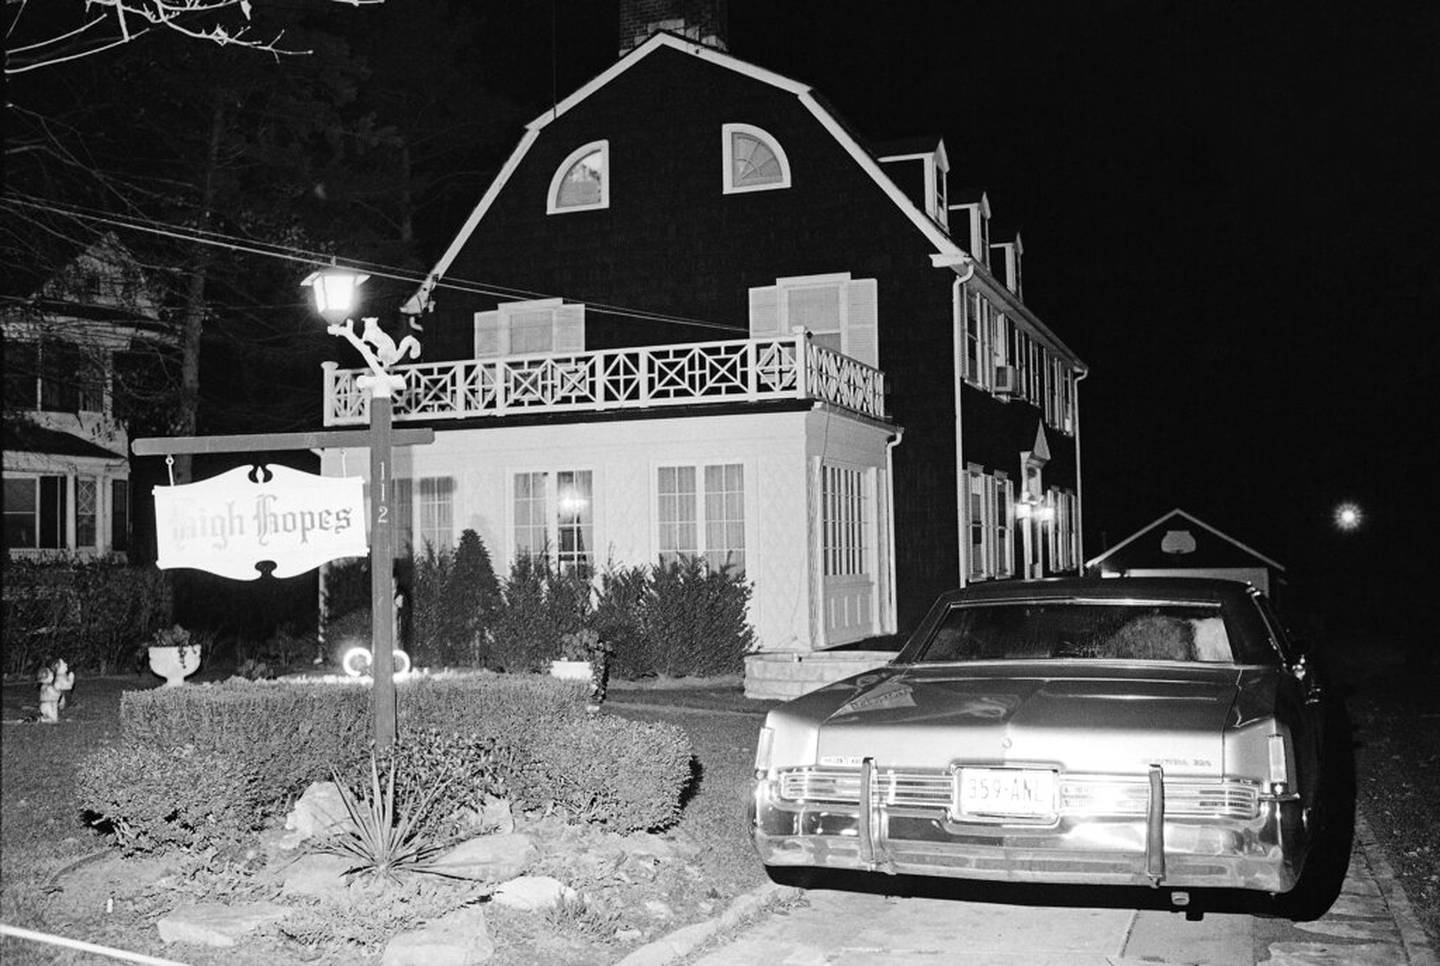 Police and members of the Suffolk County Coroner's Office investigate the murder of six people found shot in Amityville, N.Y., Nov. 14, 1974. The six bodies were from the Ronald DeFeo family and were discovered by another member of the family at early Wednesday evening. (AP Photo/Richard Drew)